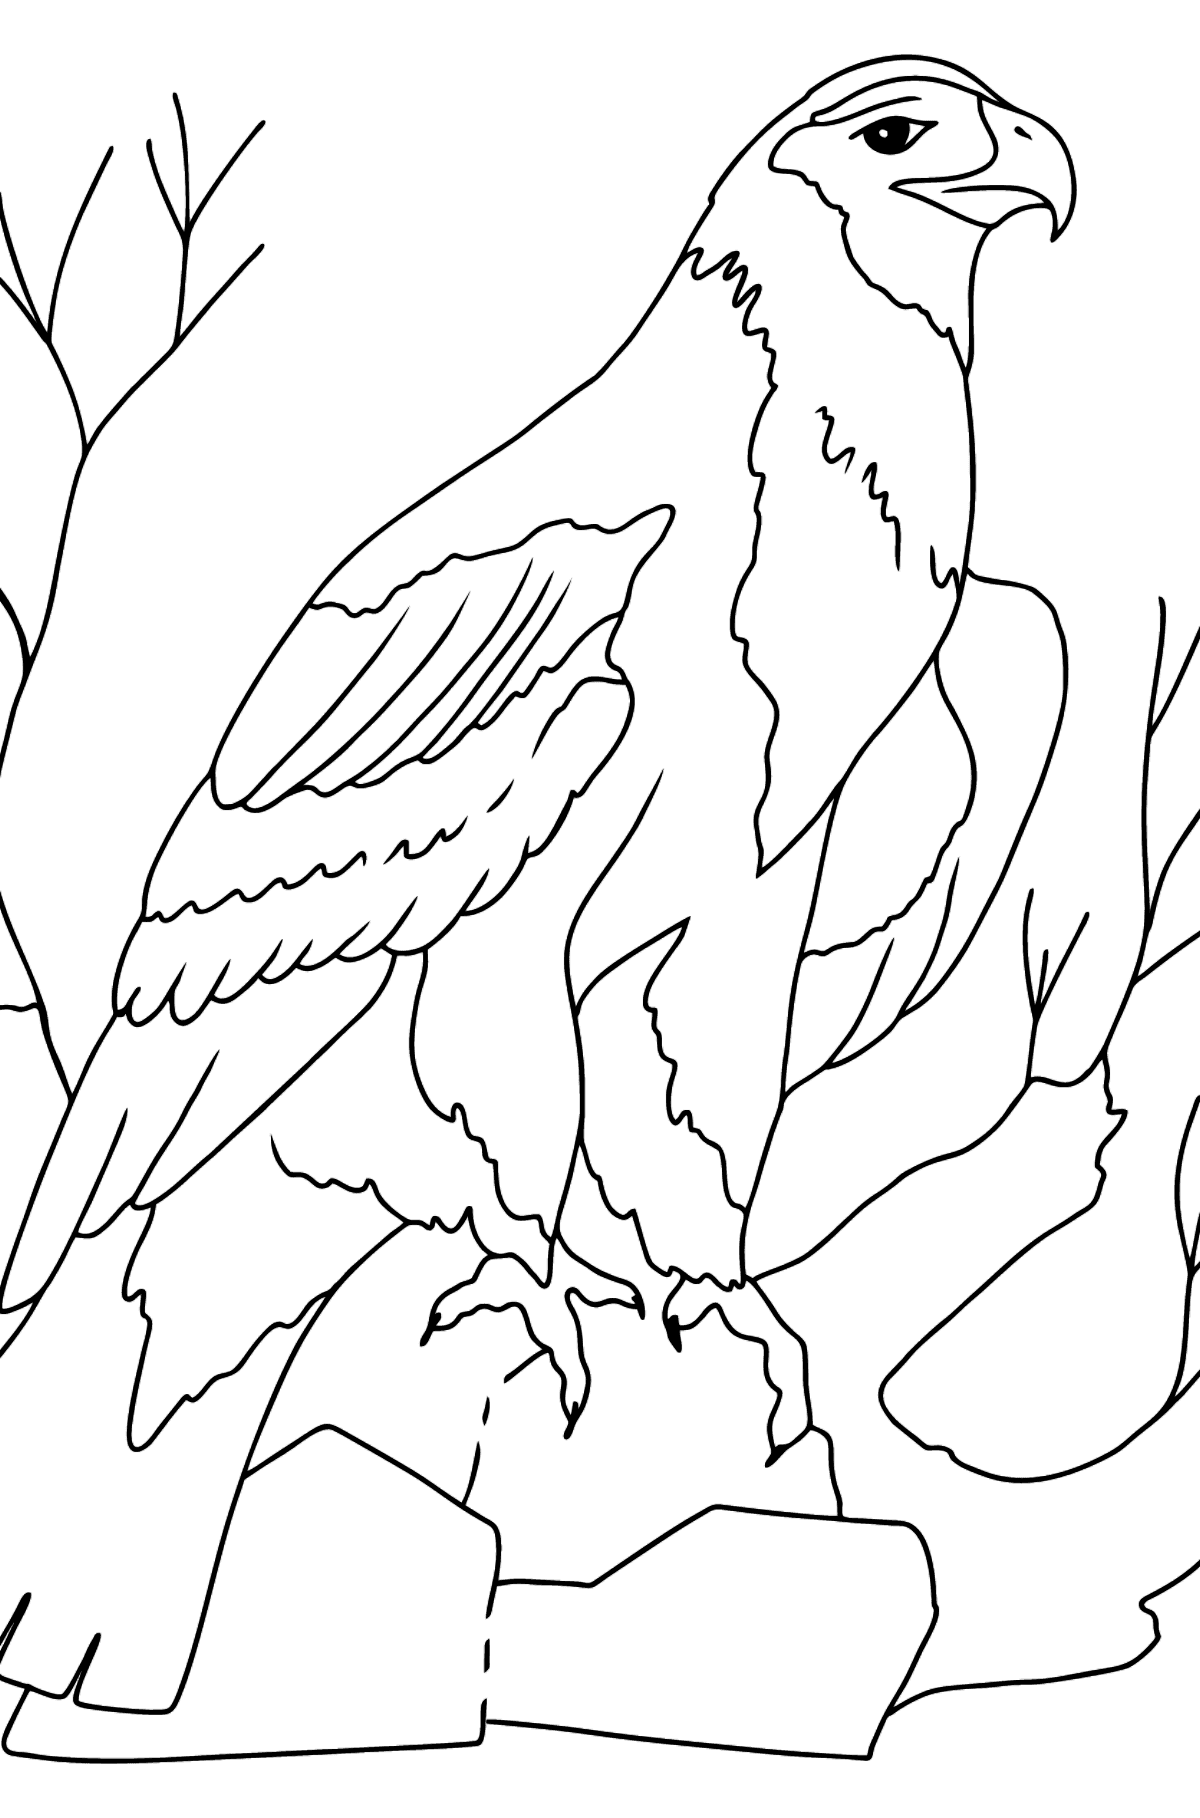 Coloring Page - An Alpine Eagle - Coloring Pages for Kids